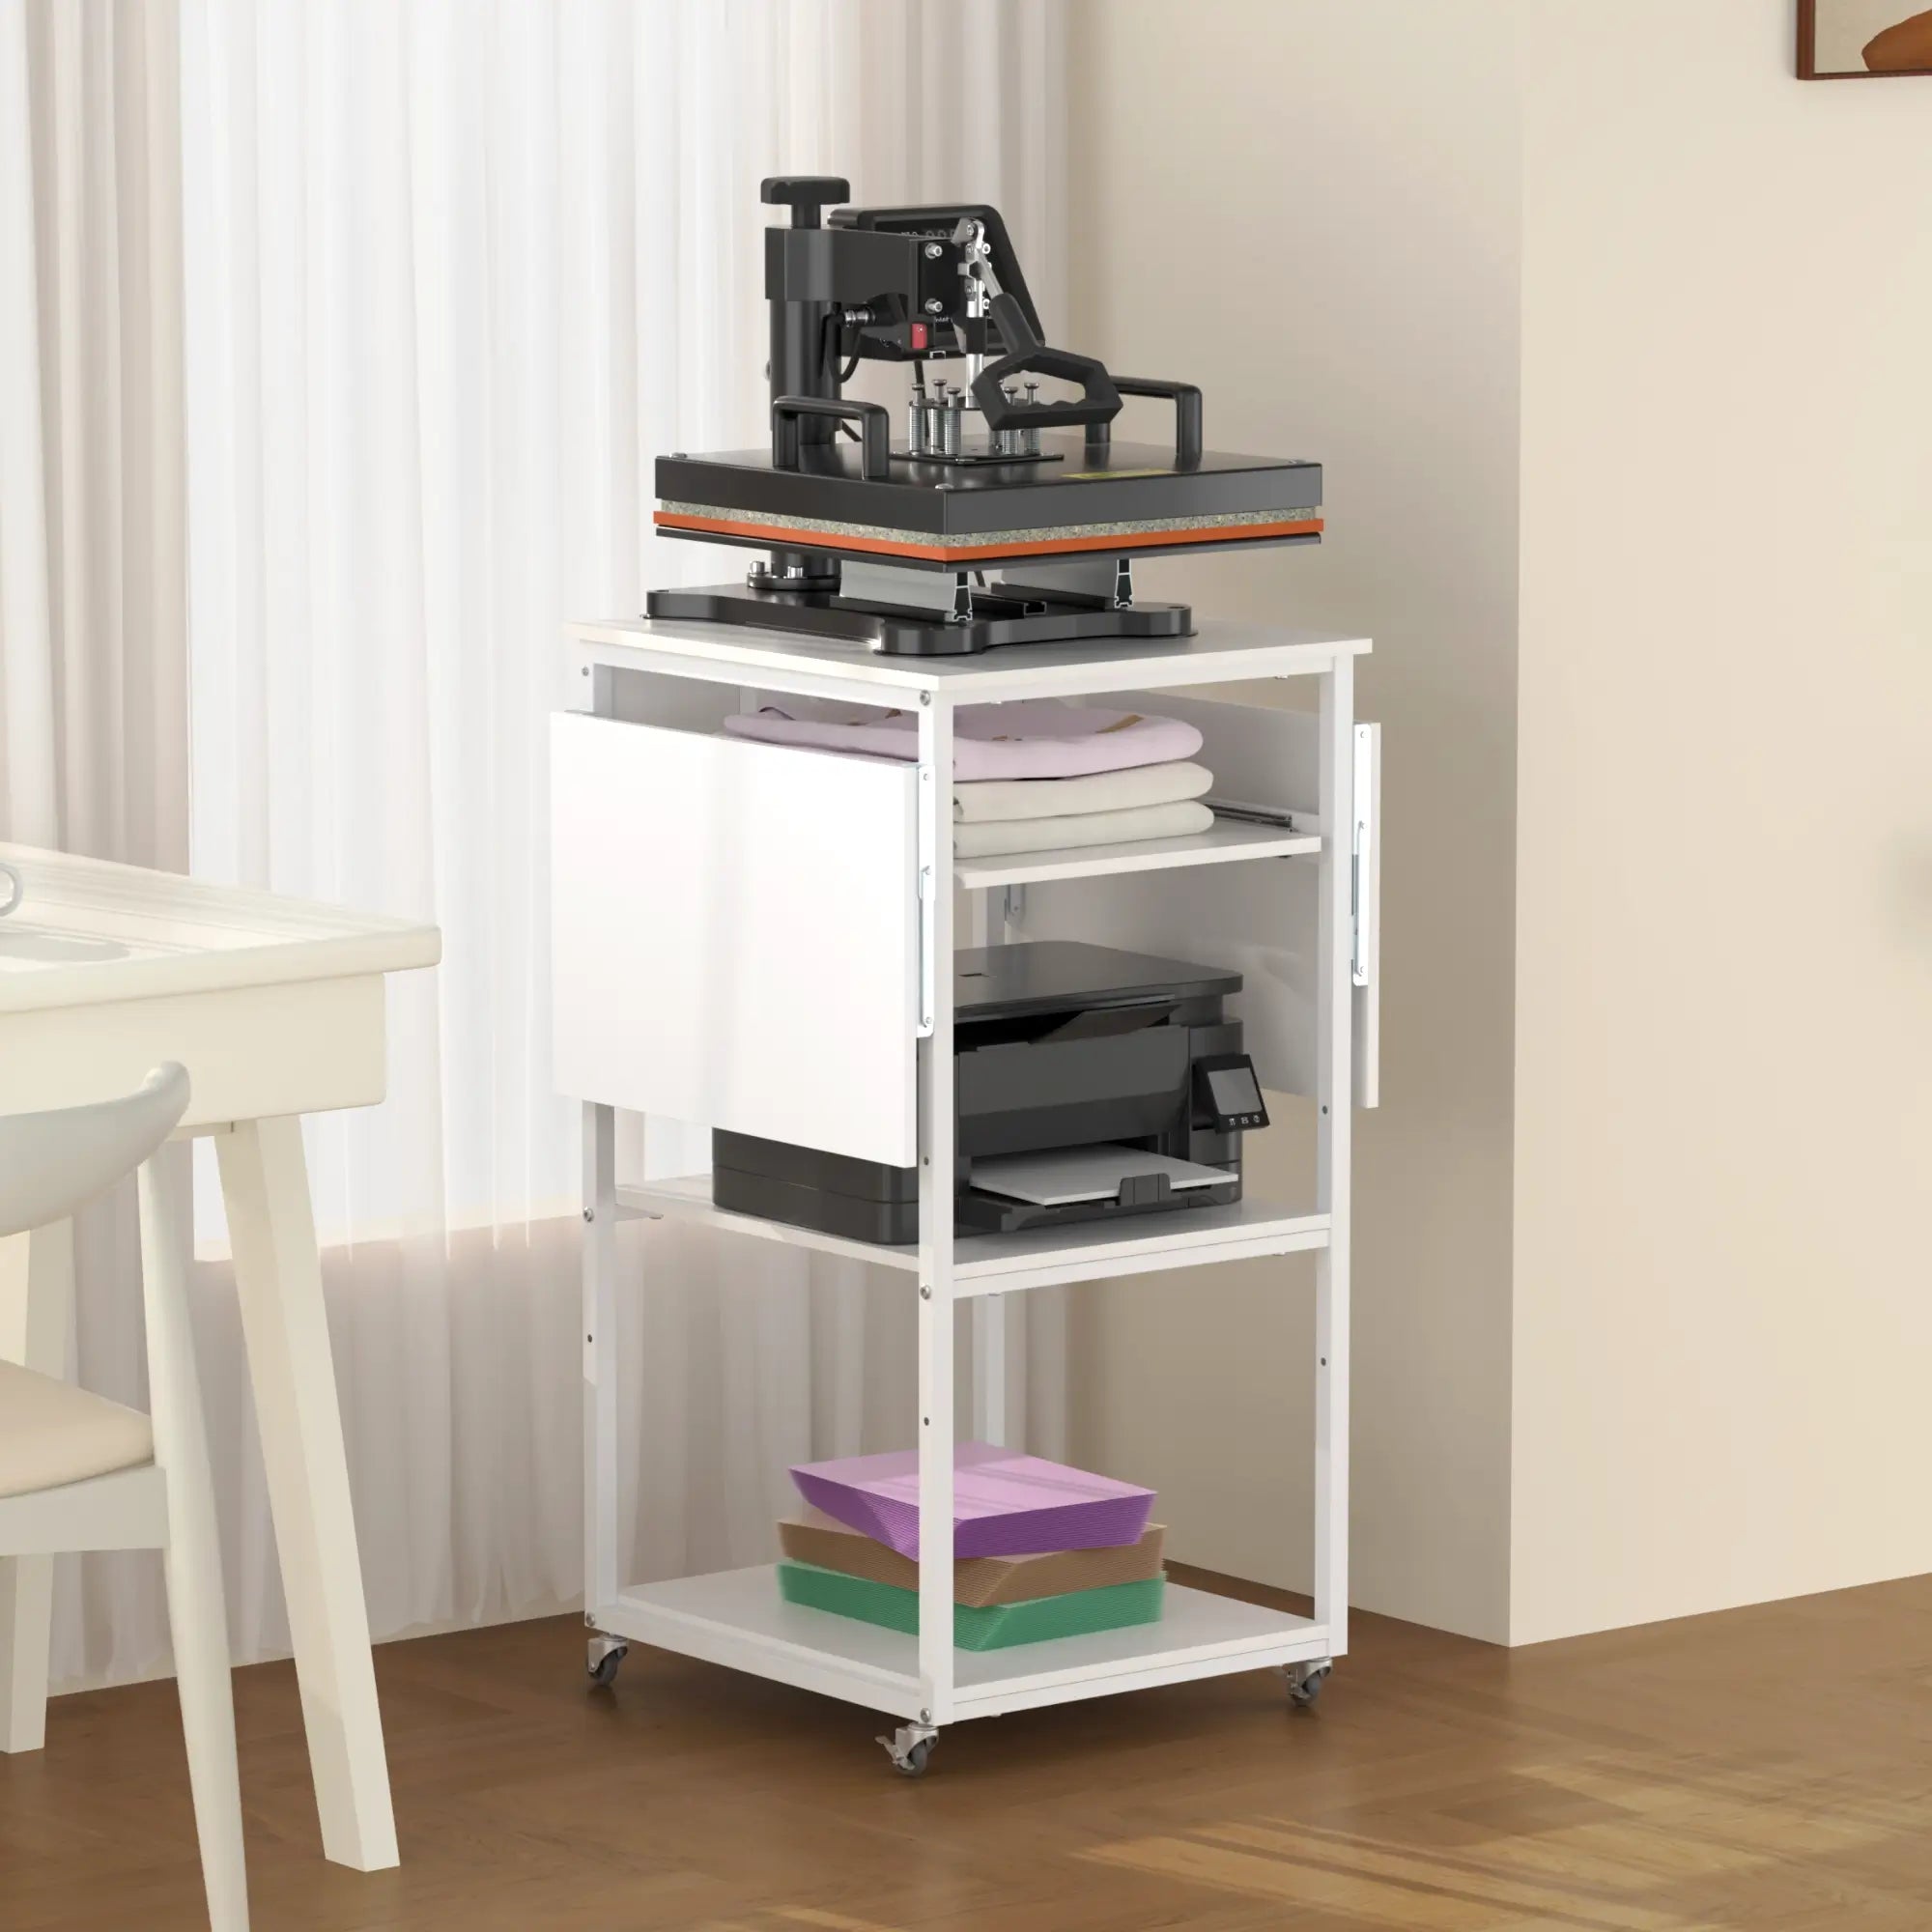 Crafit 4-Tier Adjustable Craft Storage Cart with Foldable Sides for Heat Press